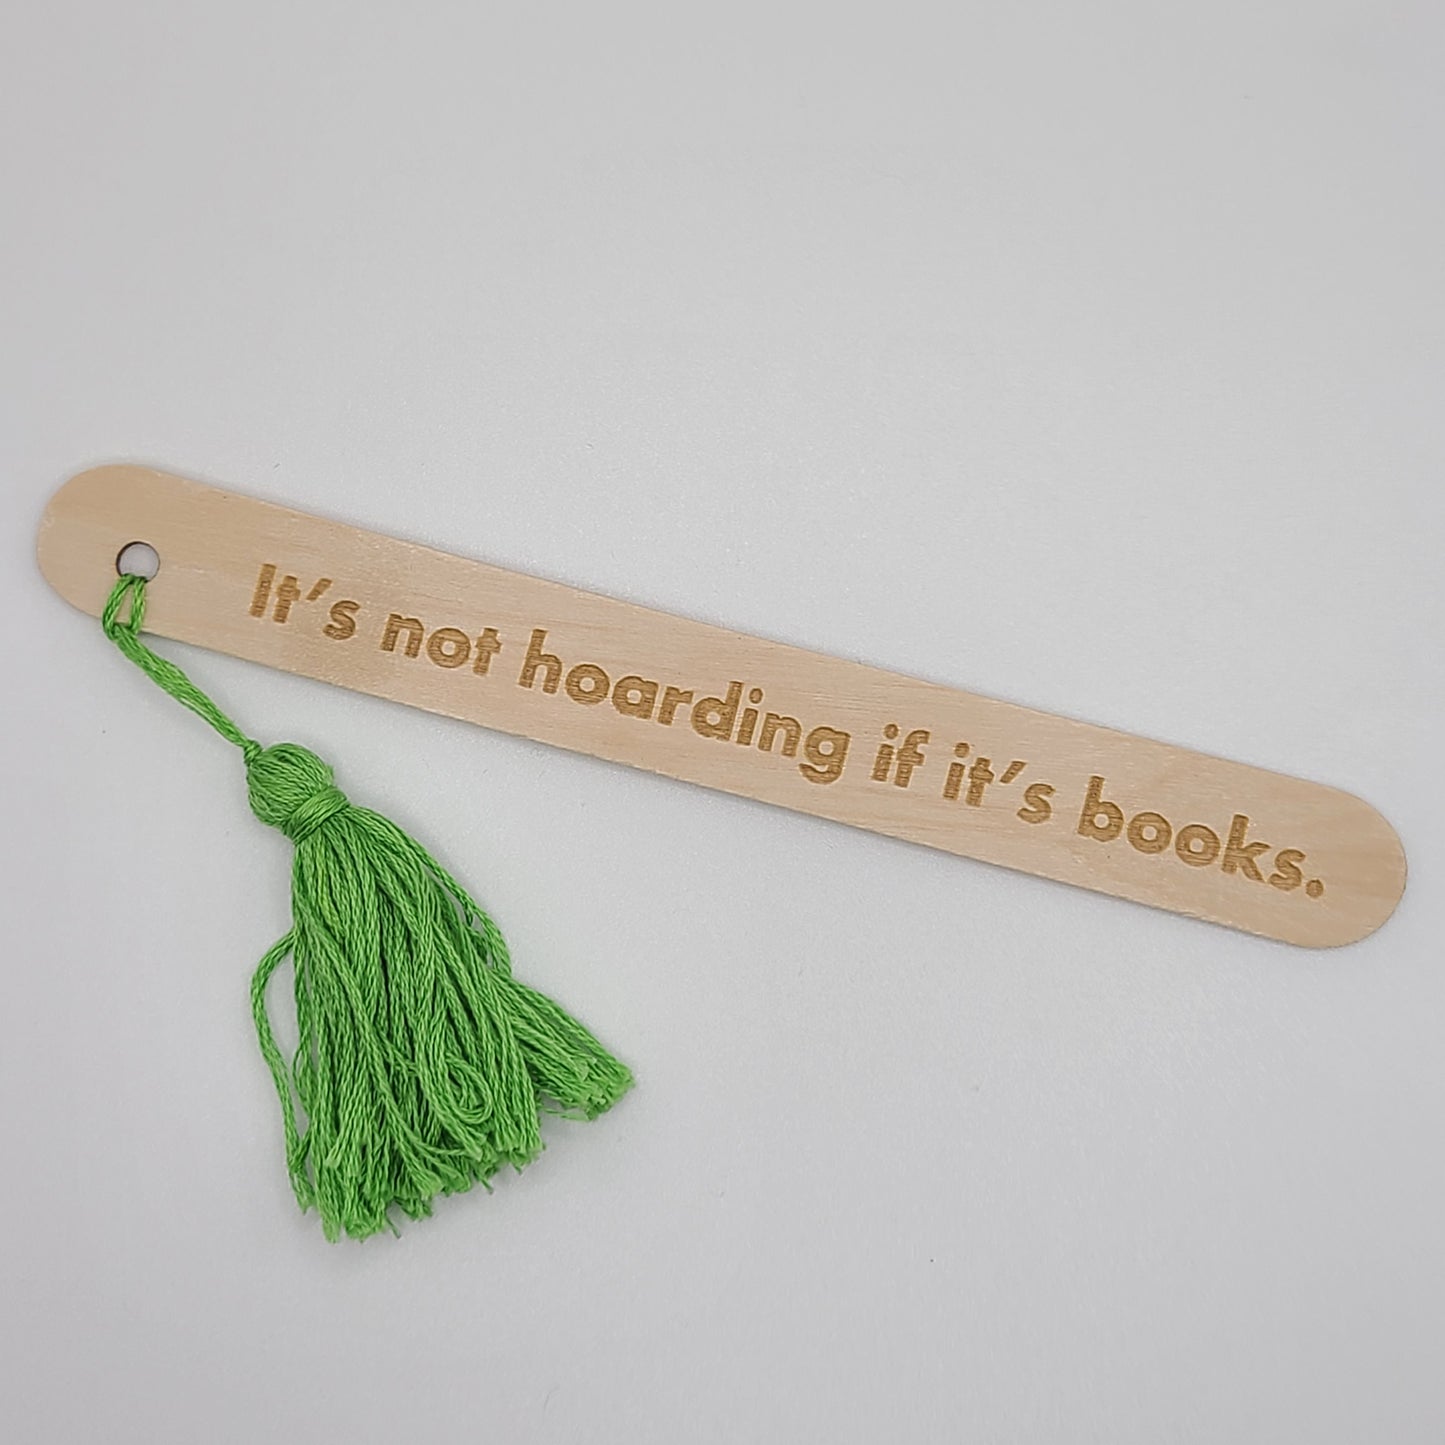 "It's not hoarding if it's books." popsicle bookmark